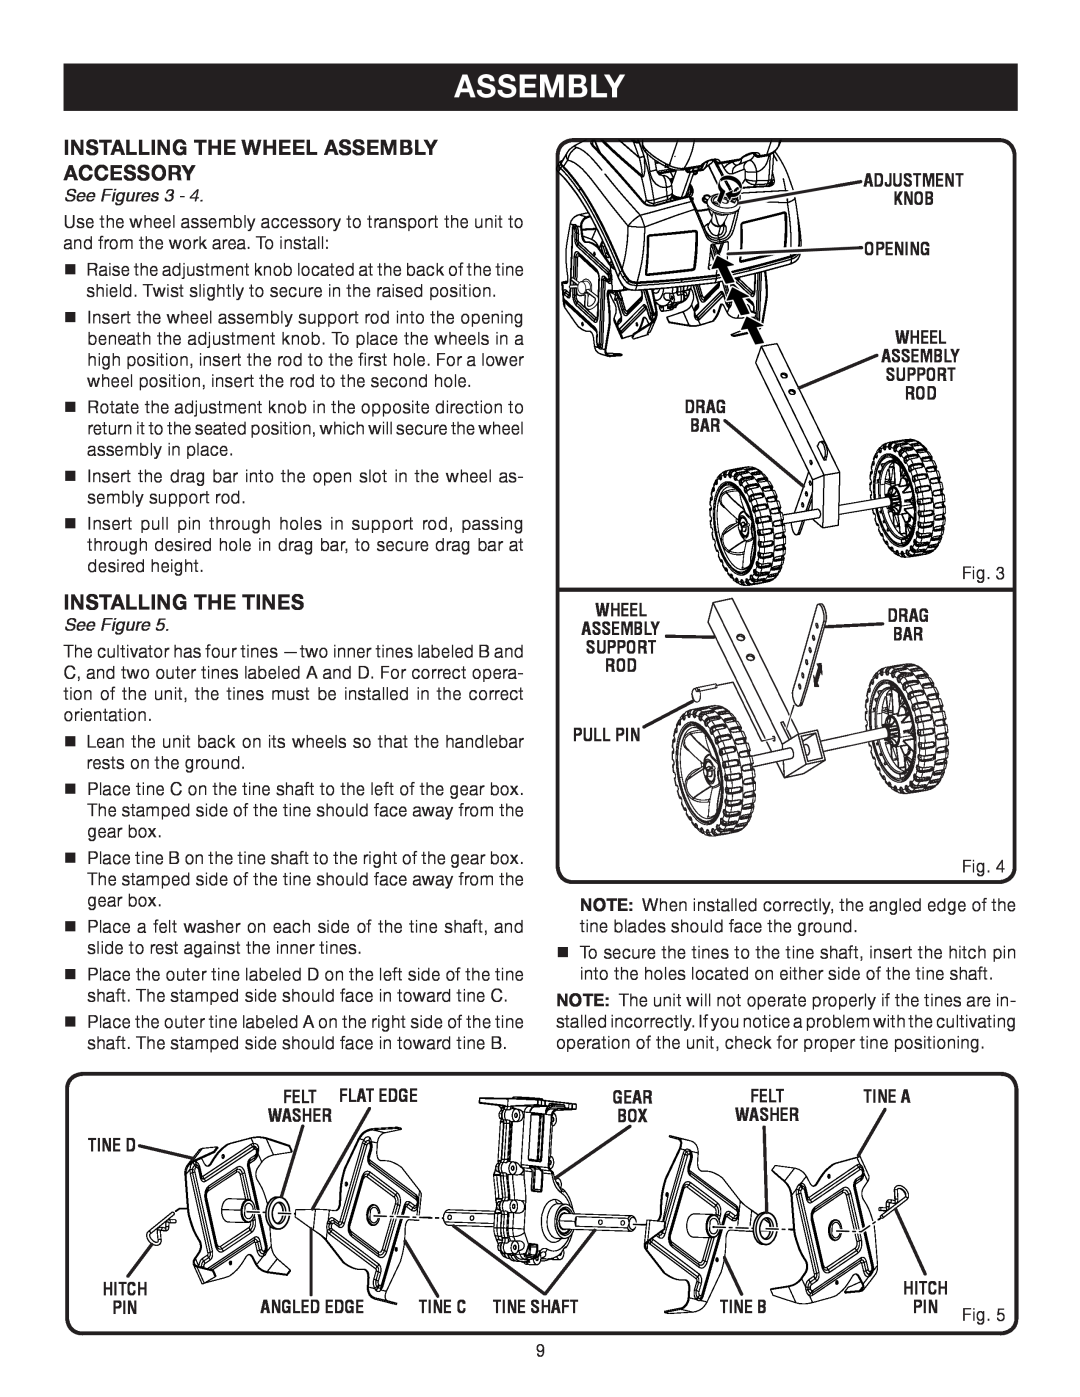 Ryobi RY60512 Installing The Wheel Assembly Accessory, Installing The Tines, See Figures, Adjustment, Drag Bar, Pull Pin 